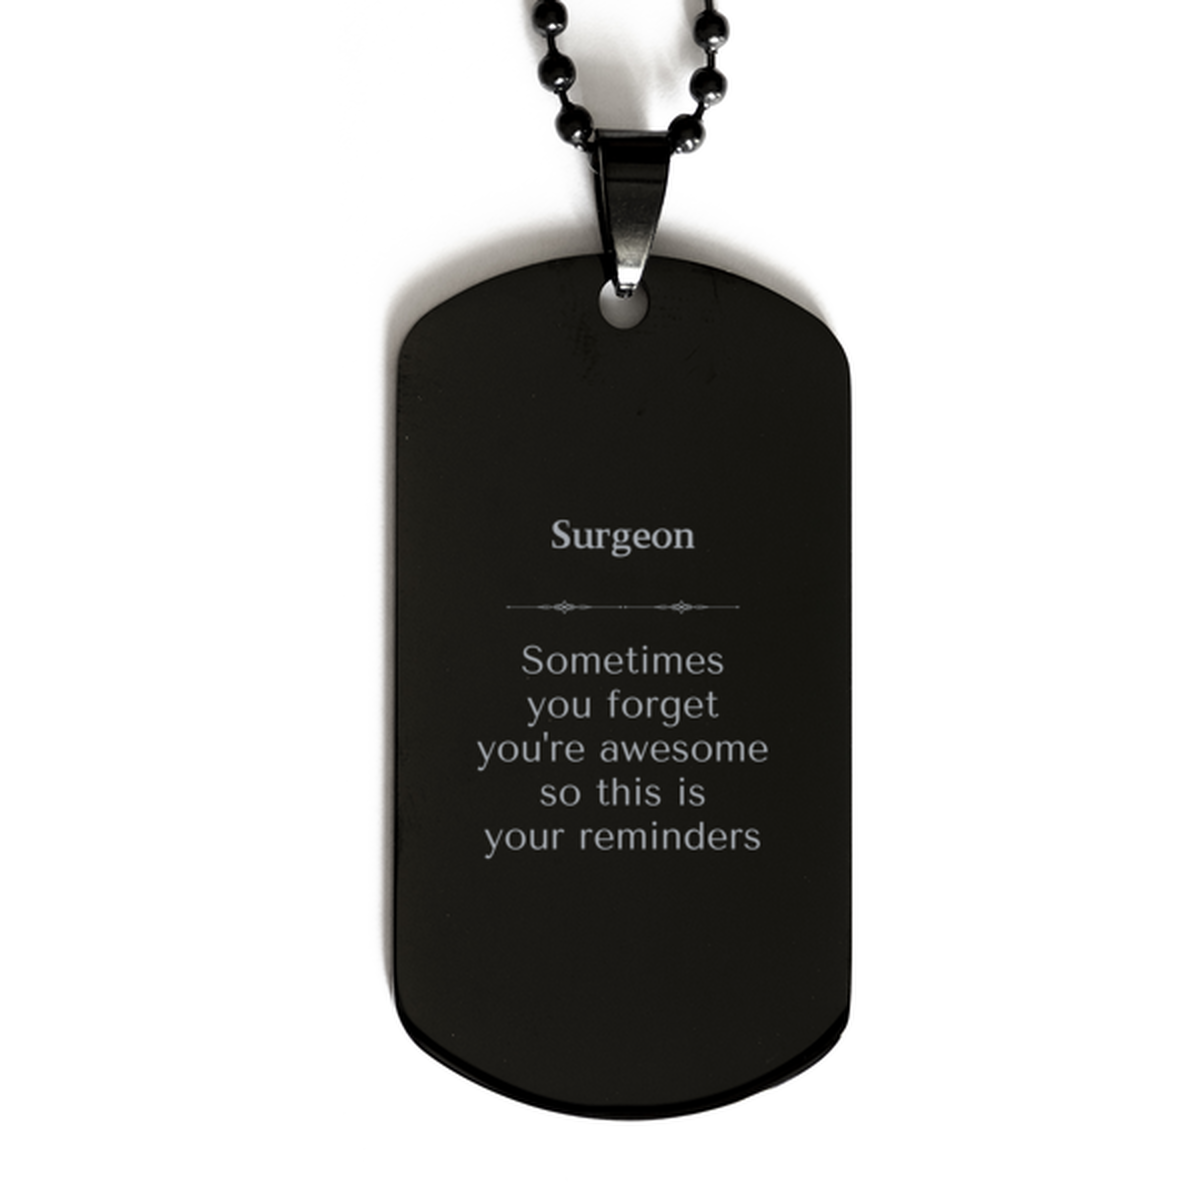 Sentimental Surgeon Black Dog Tag, Surgeon Sometimes you forget you're awesome so this is your reminders, Graduation Christmas Birthday Gifts for Surgeon, Men, Women, Coworkers